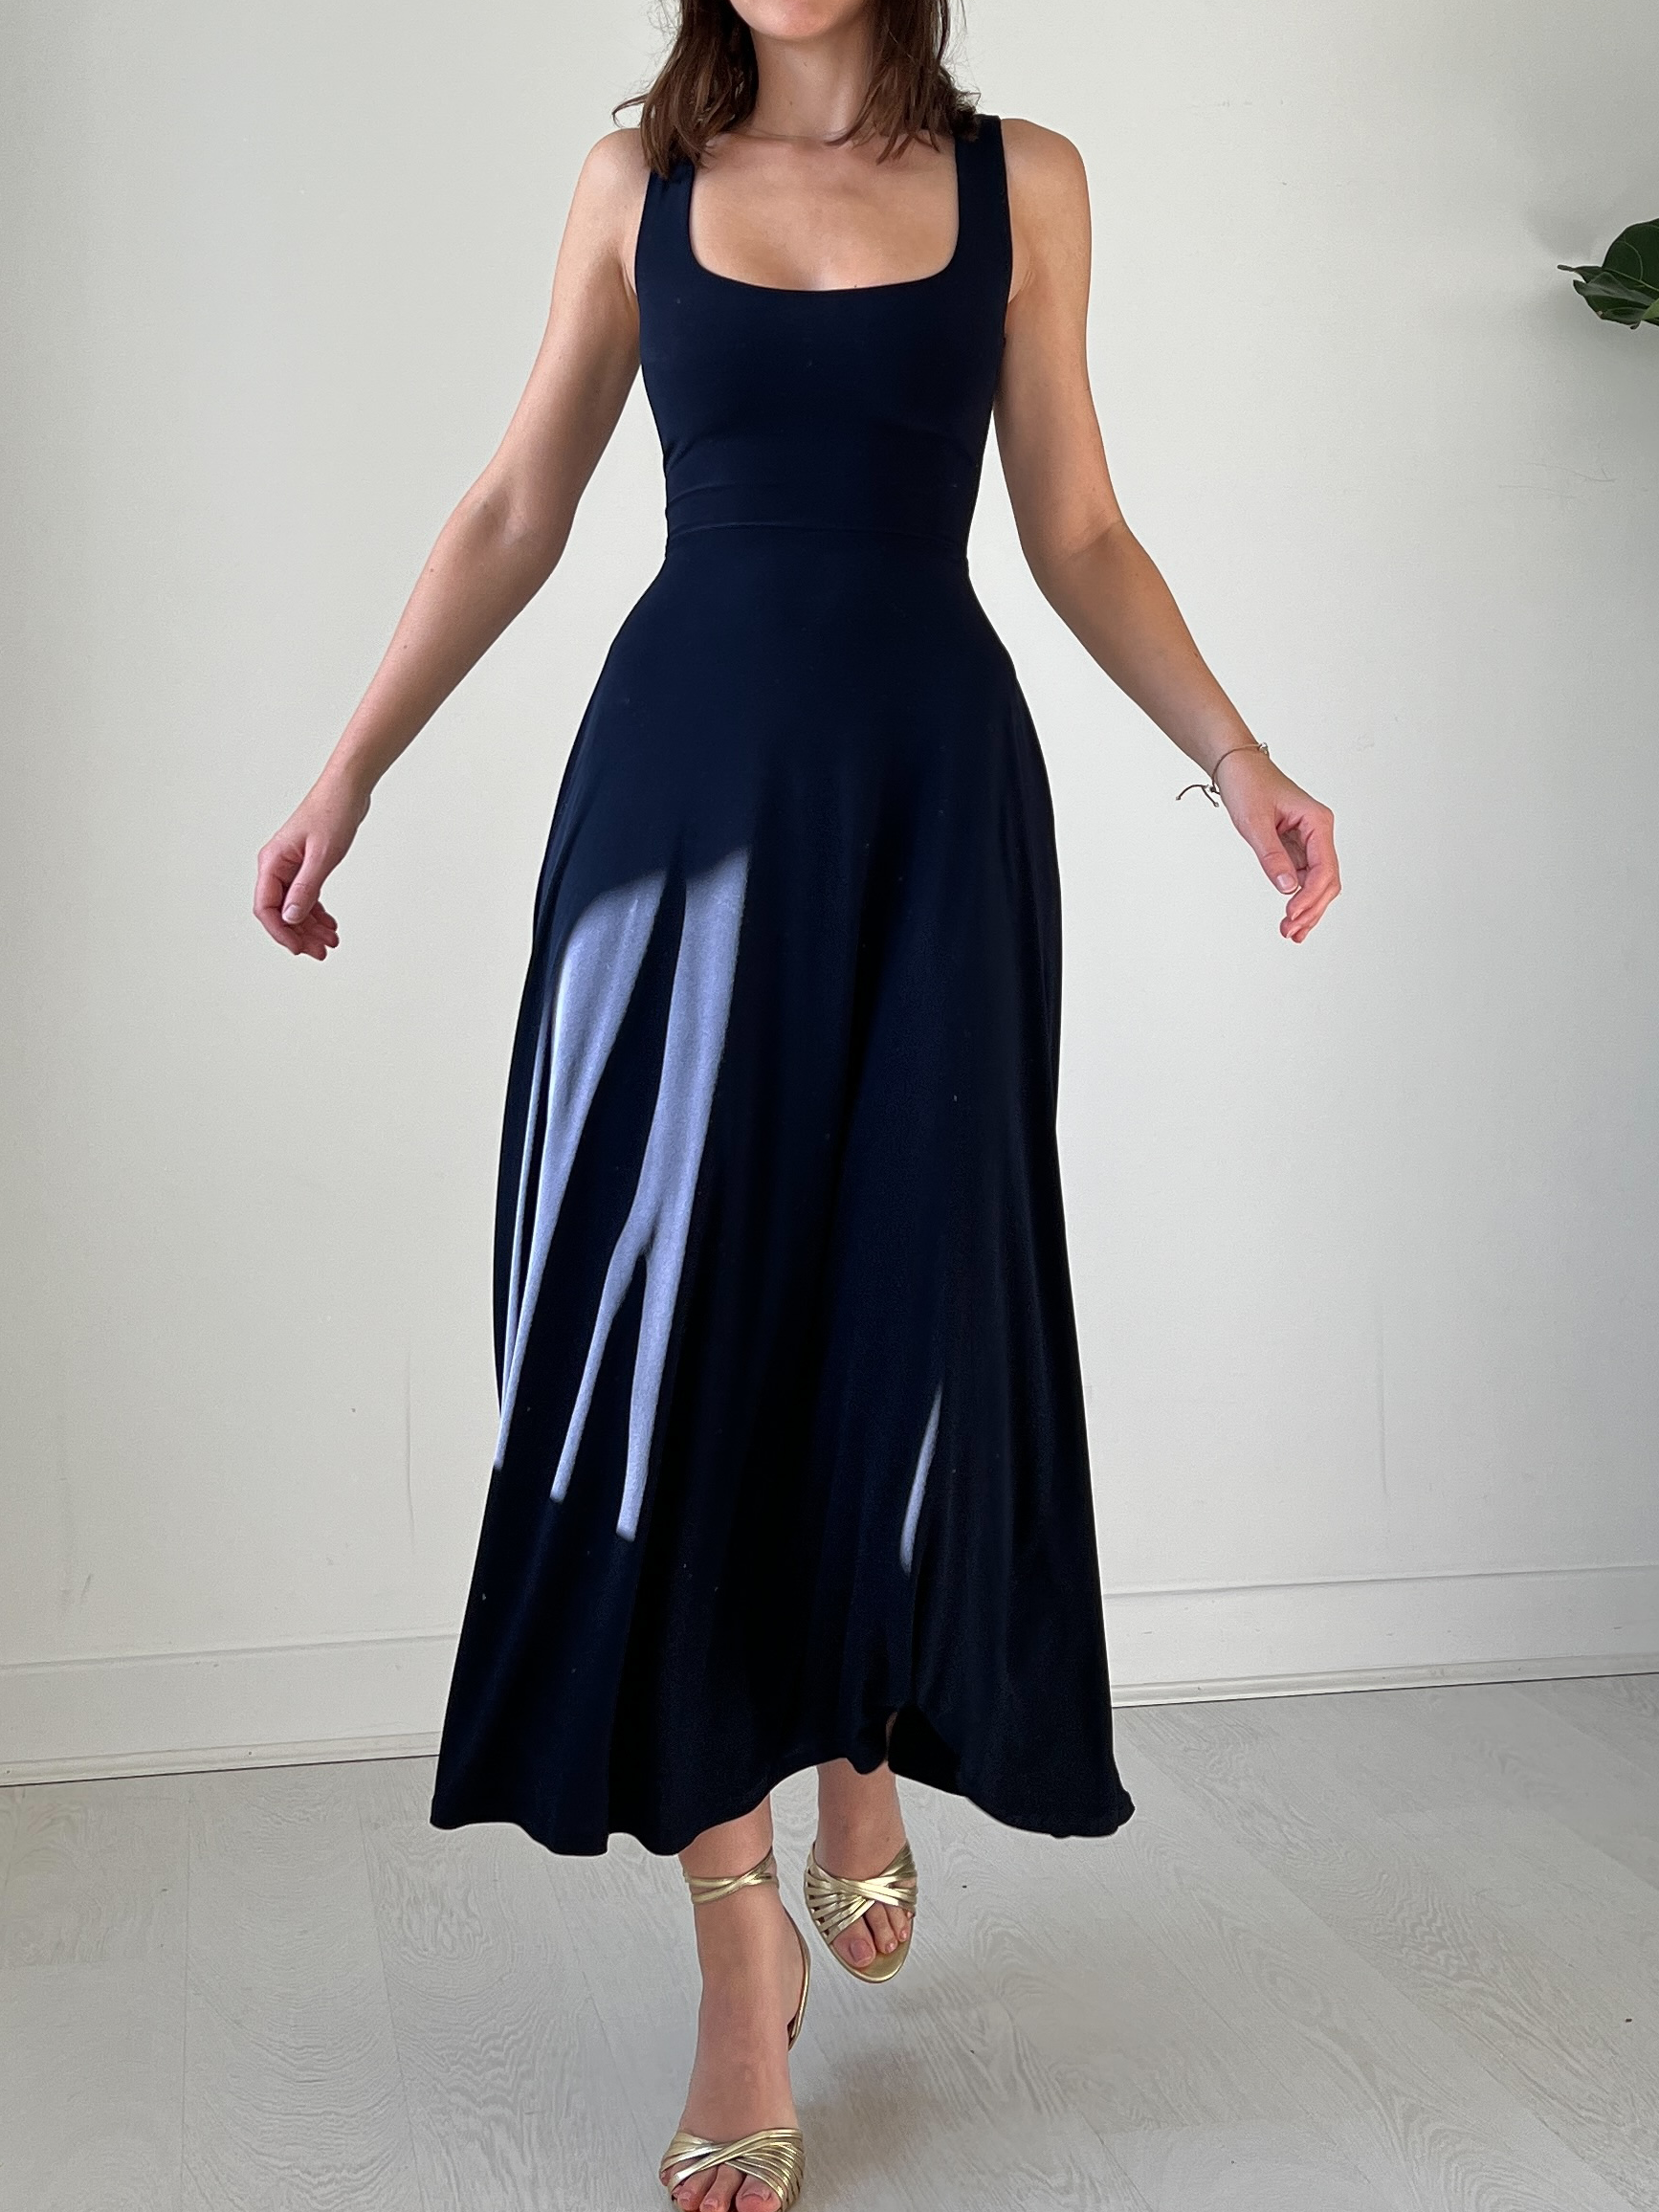 This is the 'Walter Reversible Maxi Dress' from AYM and it offers